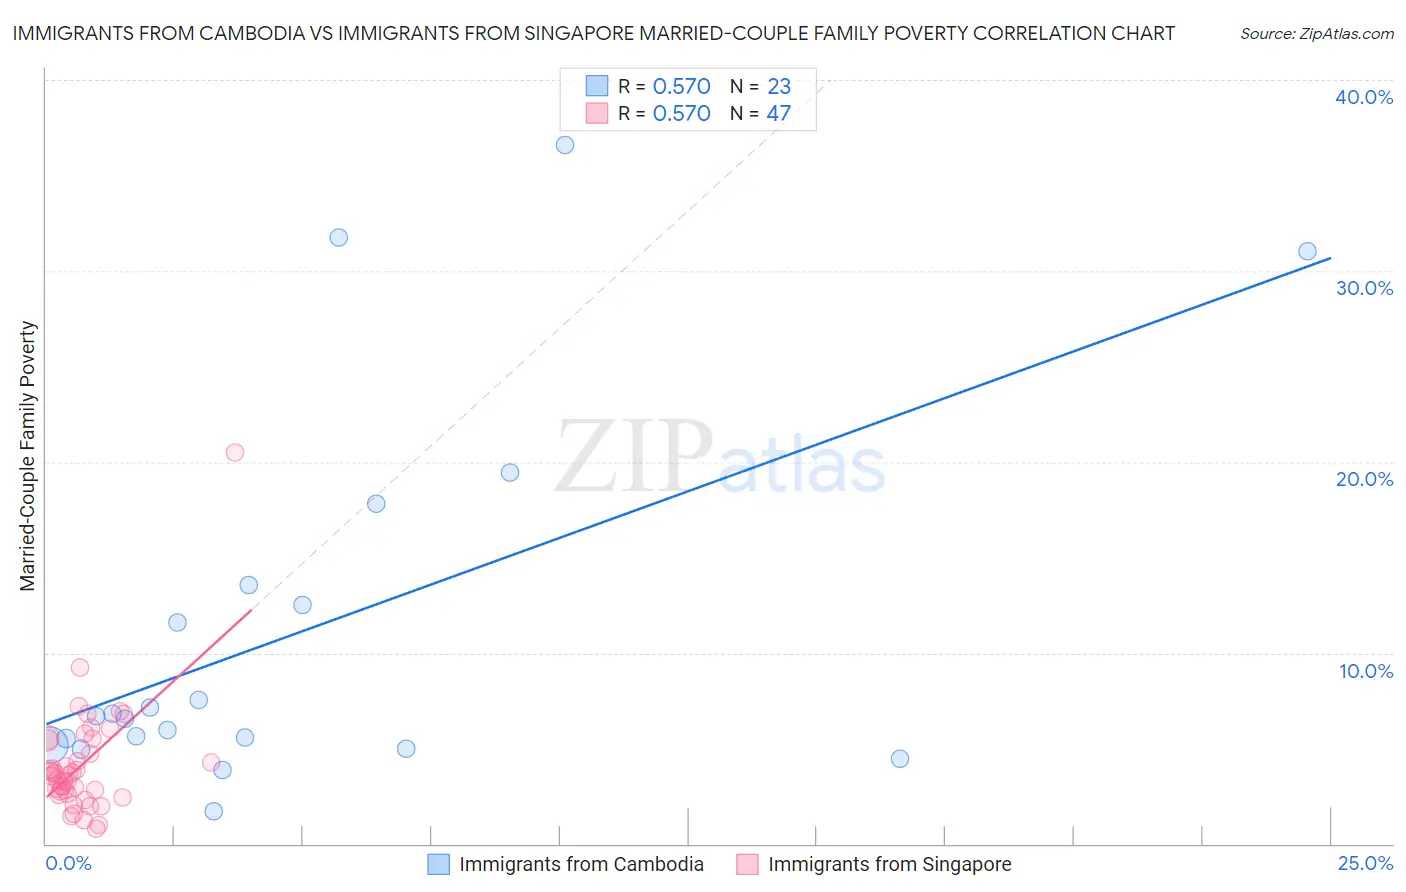 Immigrants from Cambodia vs Immigrants from Singapore Married-Couple Family Poverty